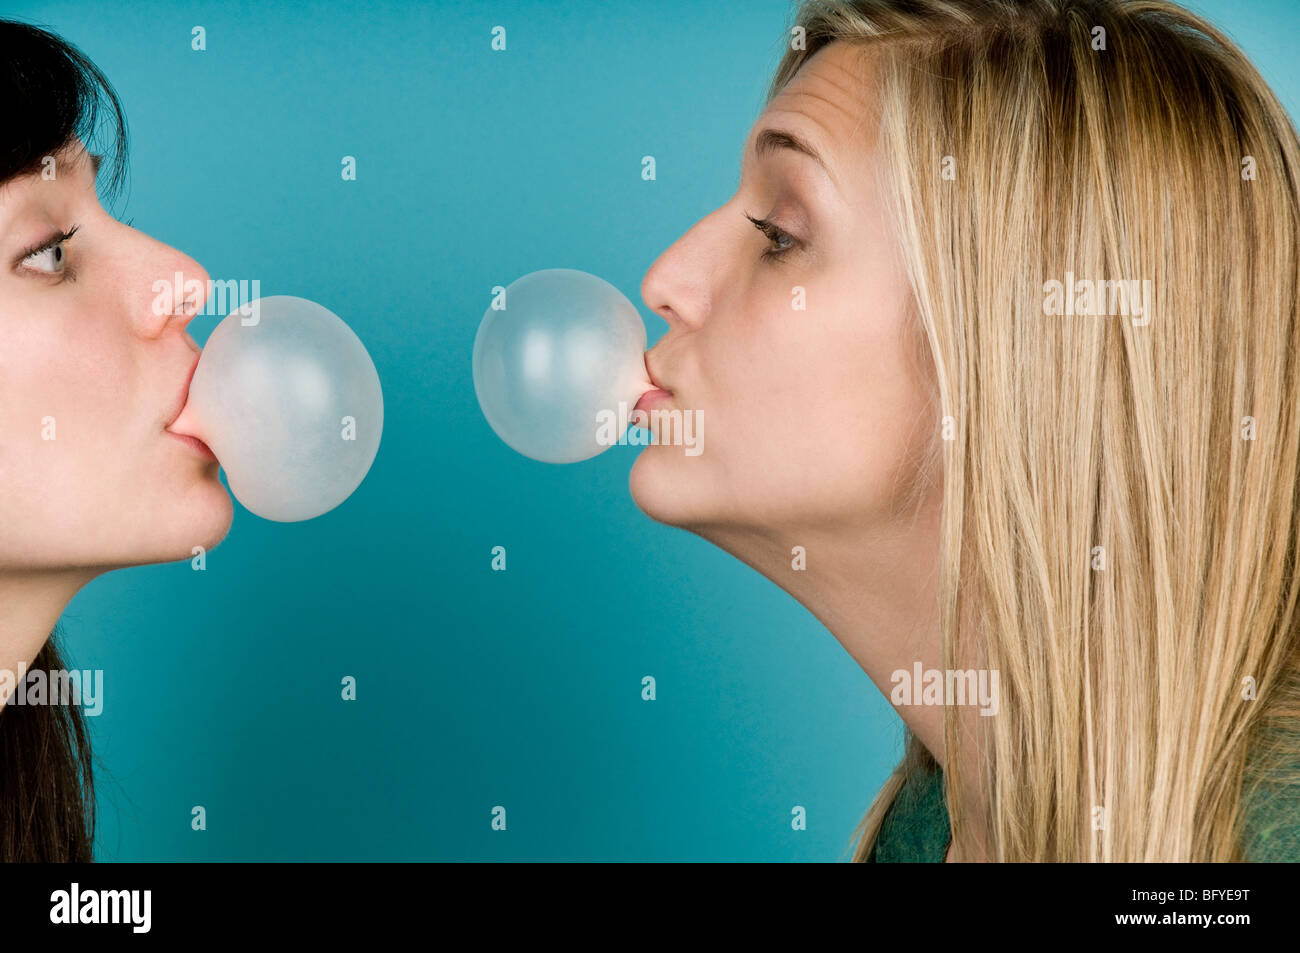 Women blowing bubbles with gum Stock Photo